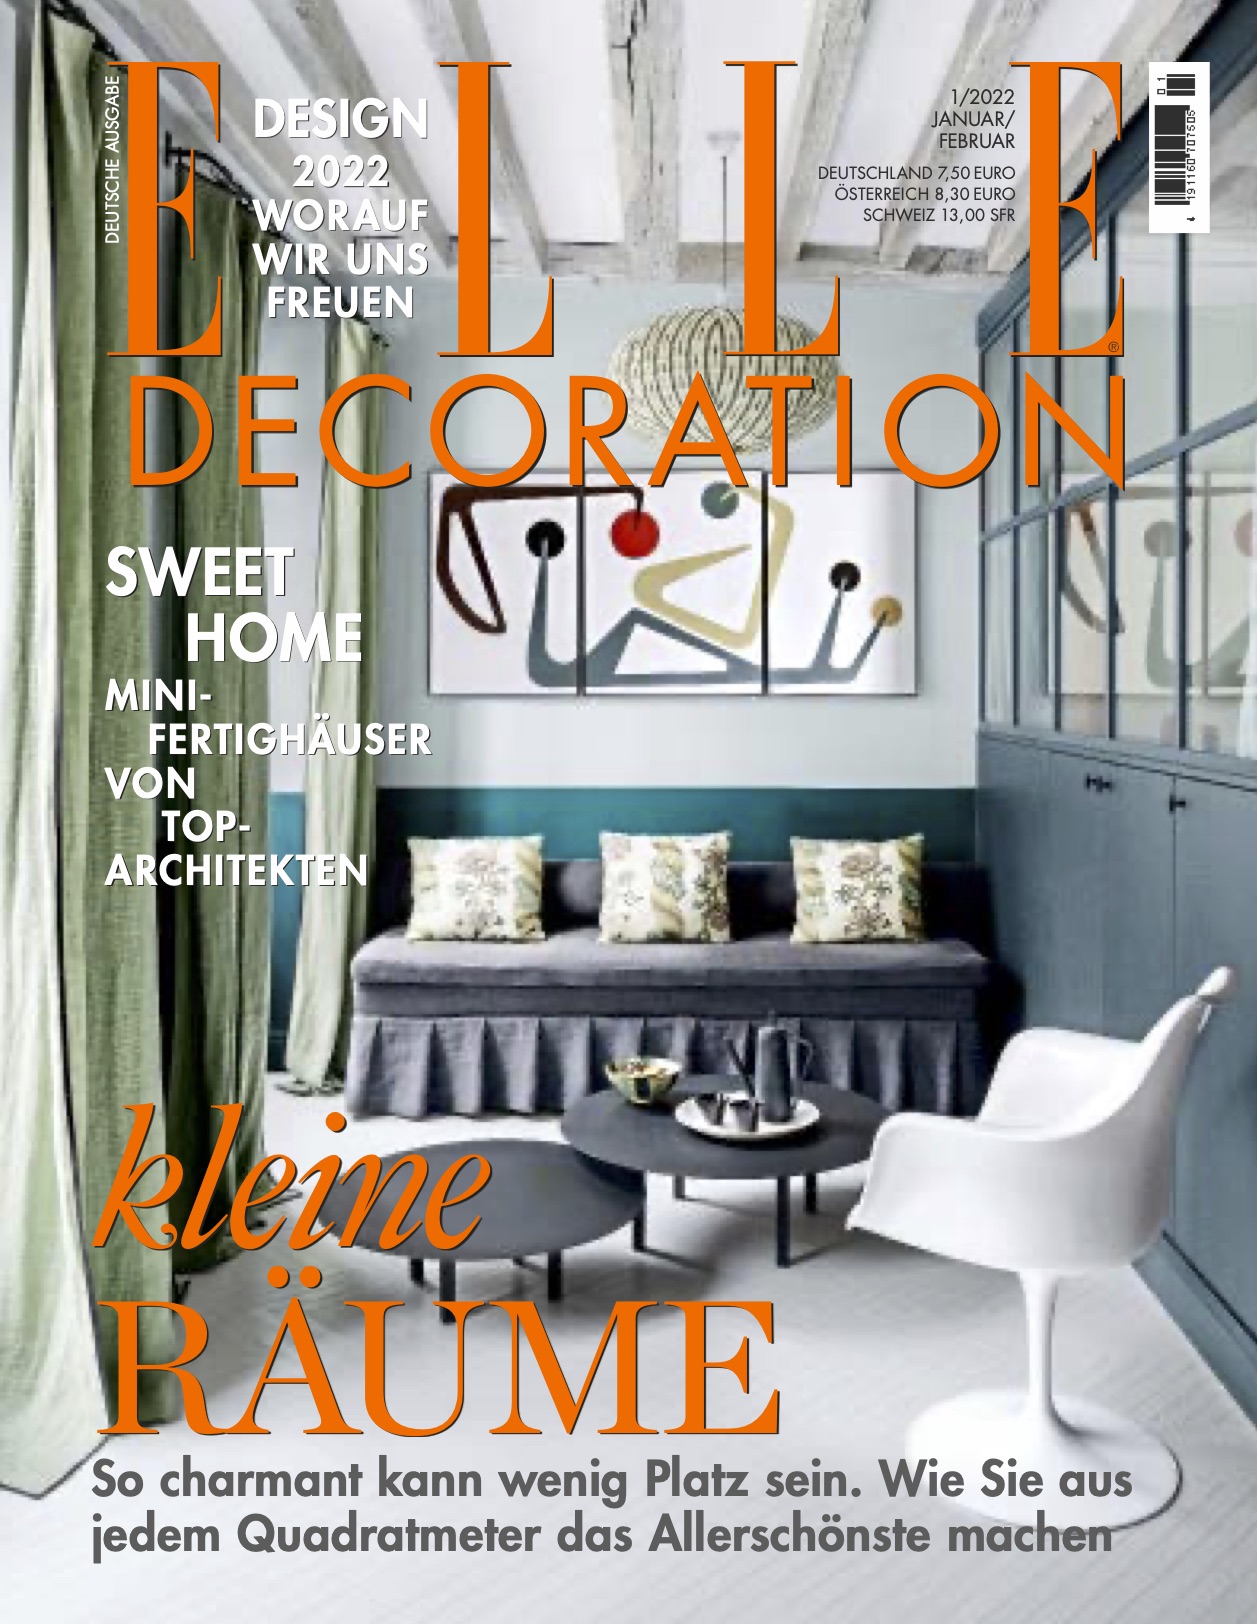 Live in the moment with the ELLE Decoration May issue